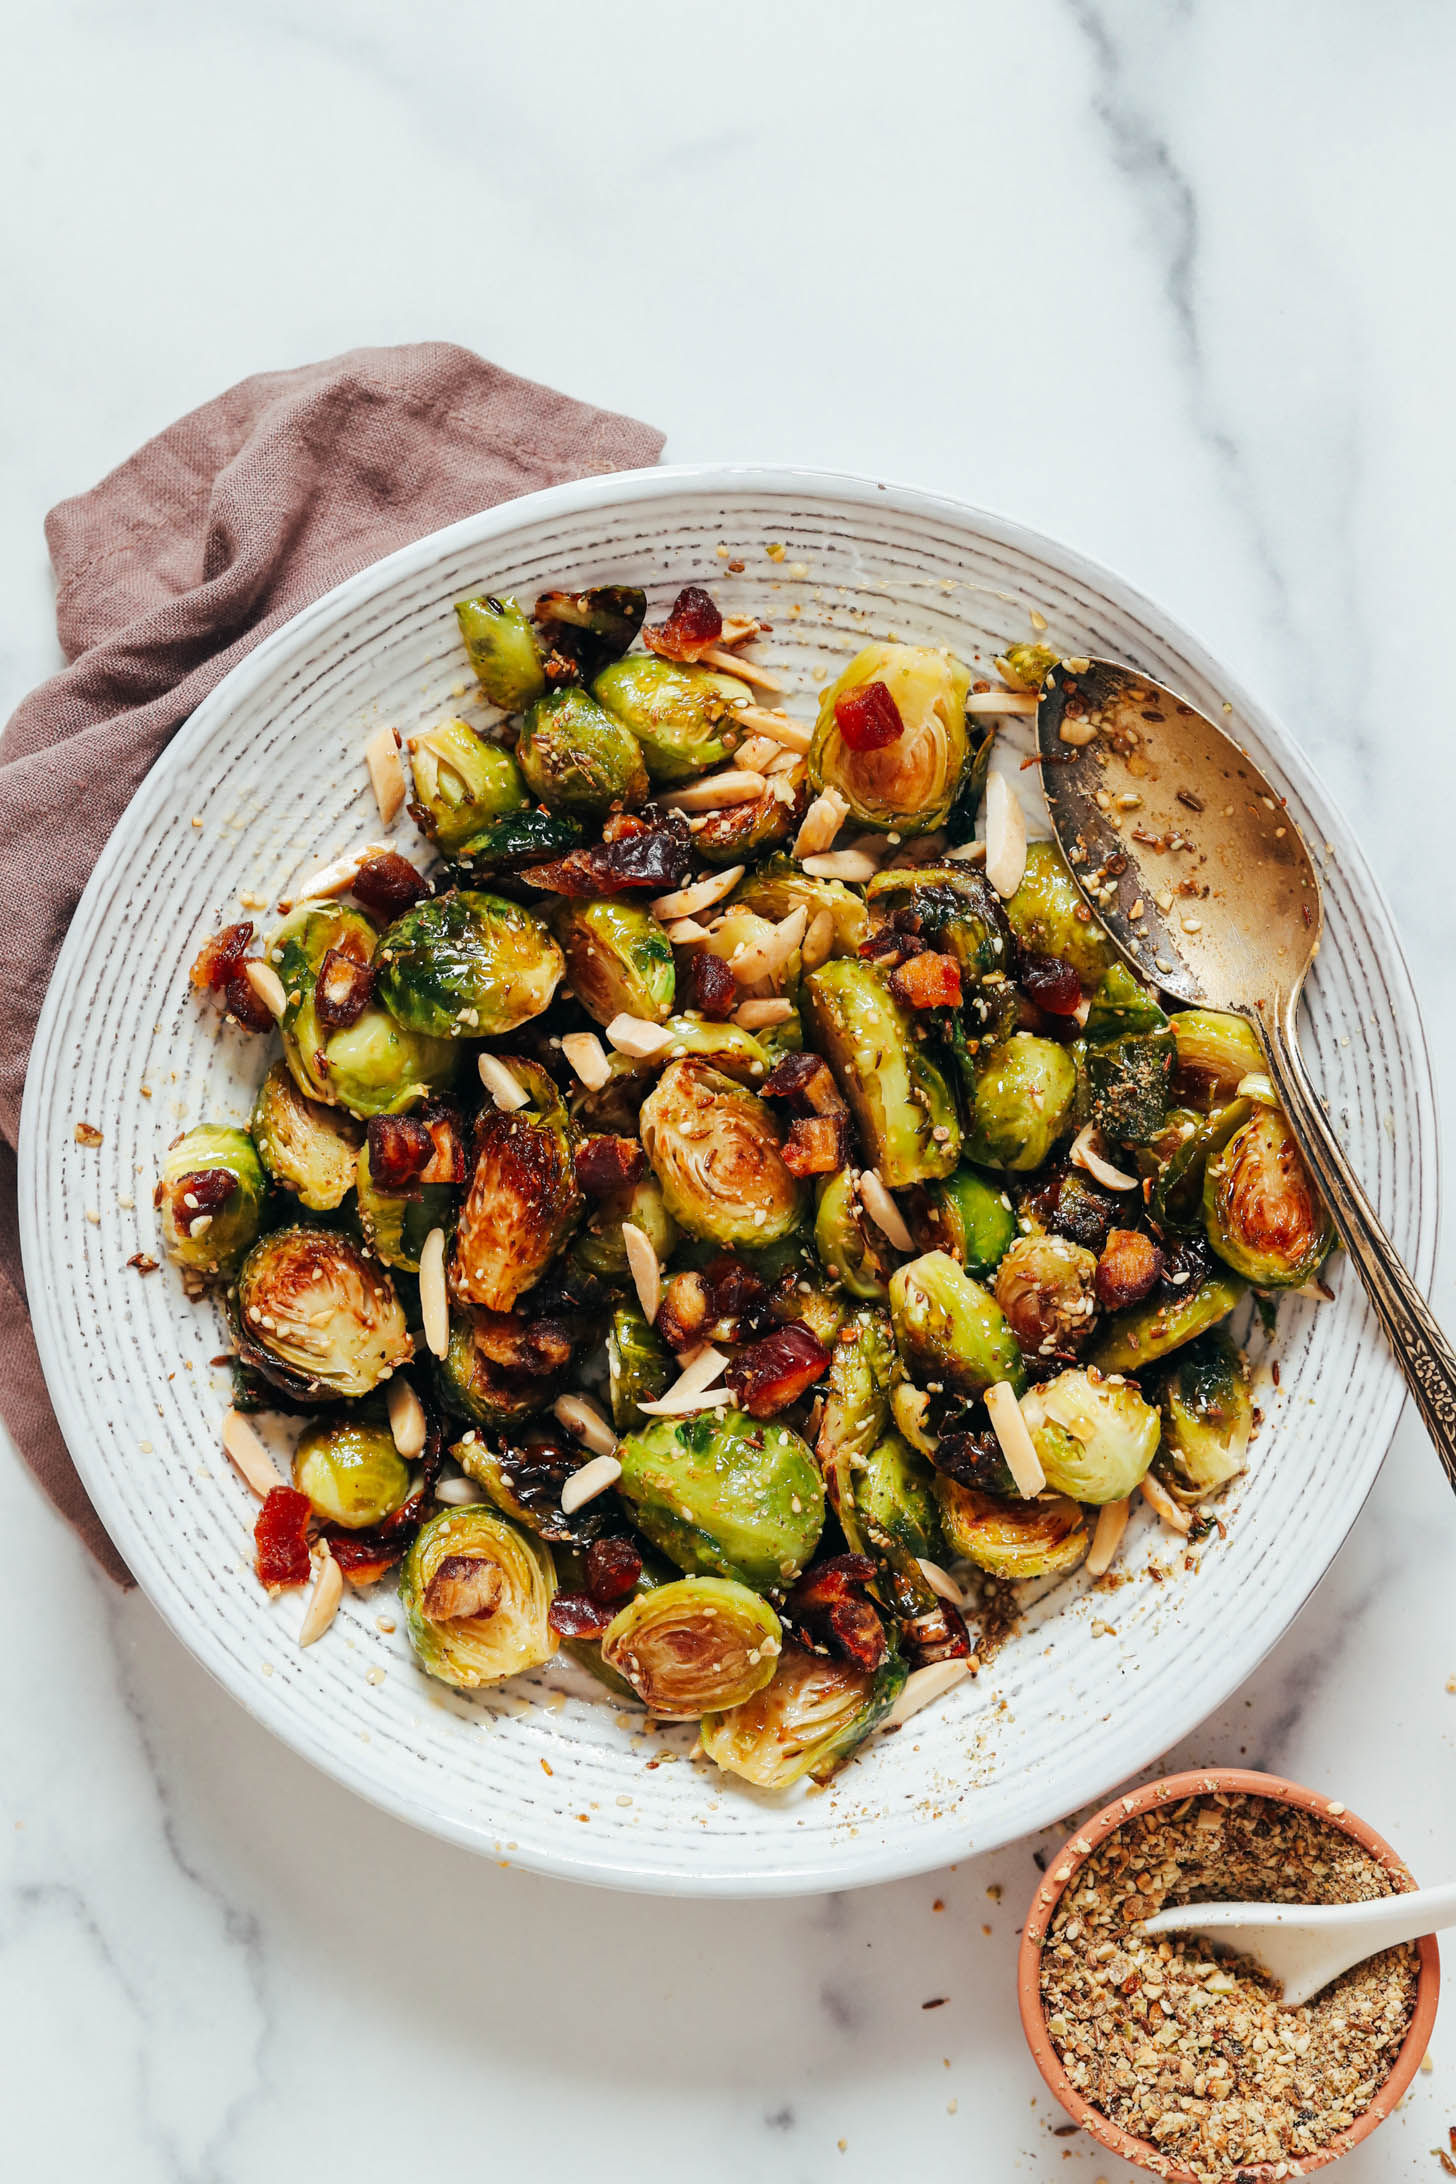 Bowl of dukkah seasoning next to a larger bowl of crispy roasted Brussels sprouts with dates and almonds